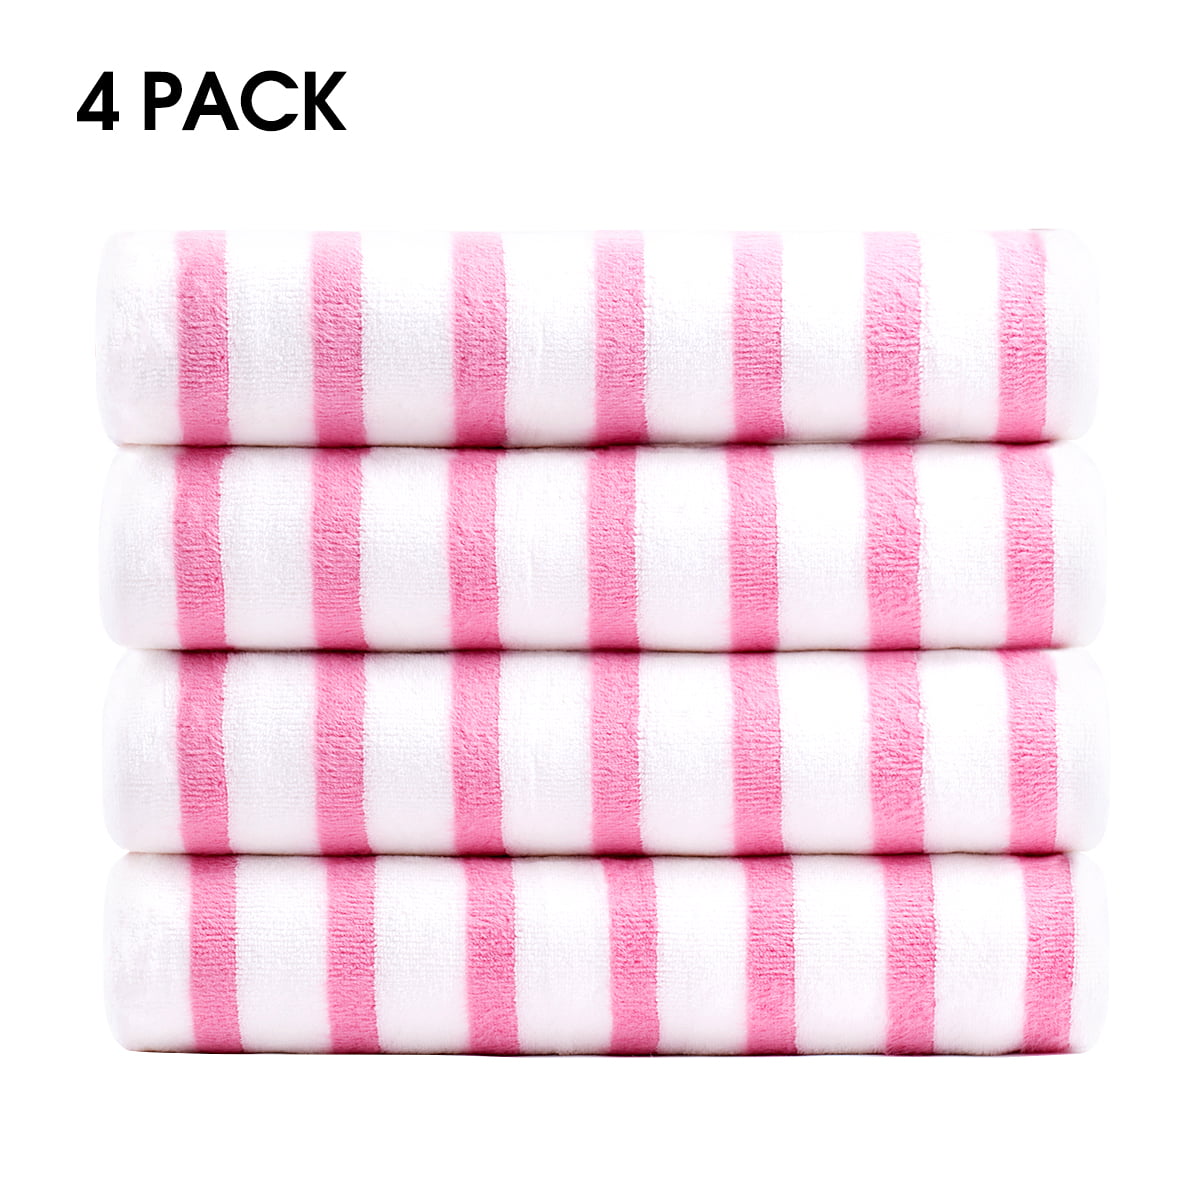 Microfiber Quick Dry Towel Unique Design Beach Towels Oversized 71x35.4in Pool Towels Oversized,Lightweight Compact Camping Towels,Super Absorbent Swimming Towel,Perfect Travel Body Towel,Nice Gift 